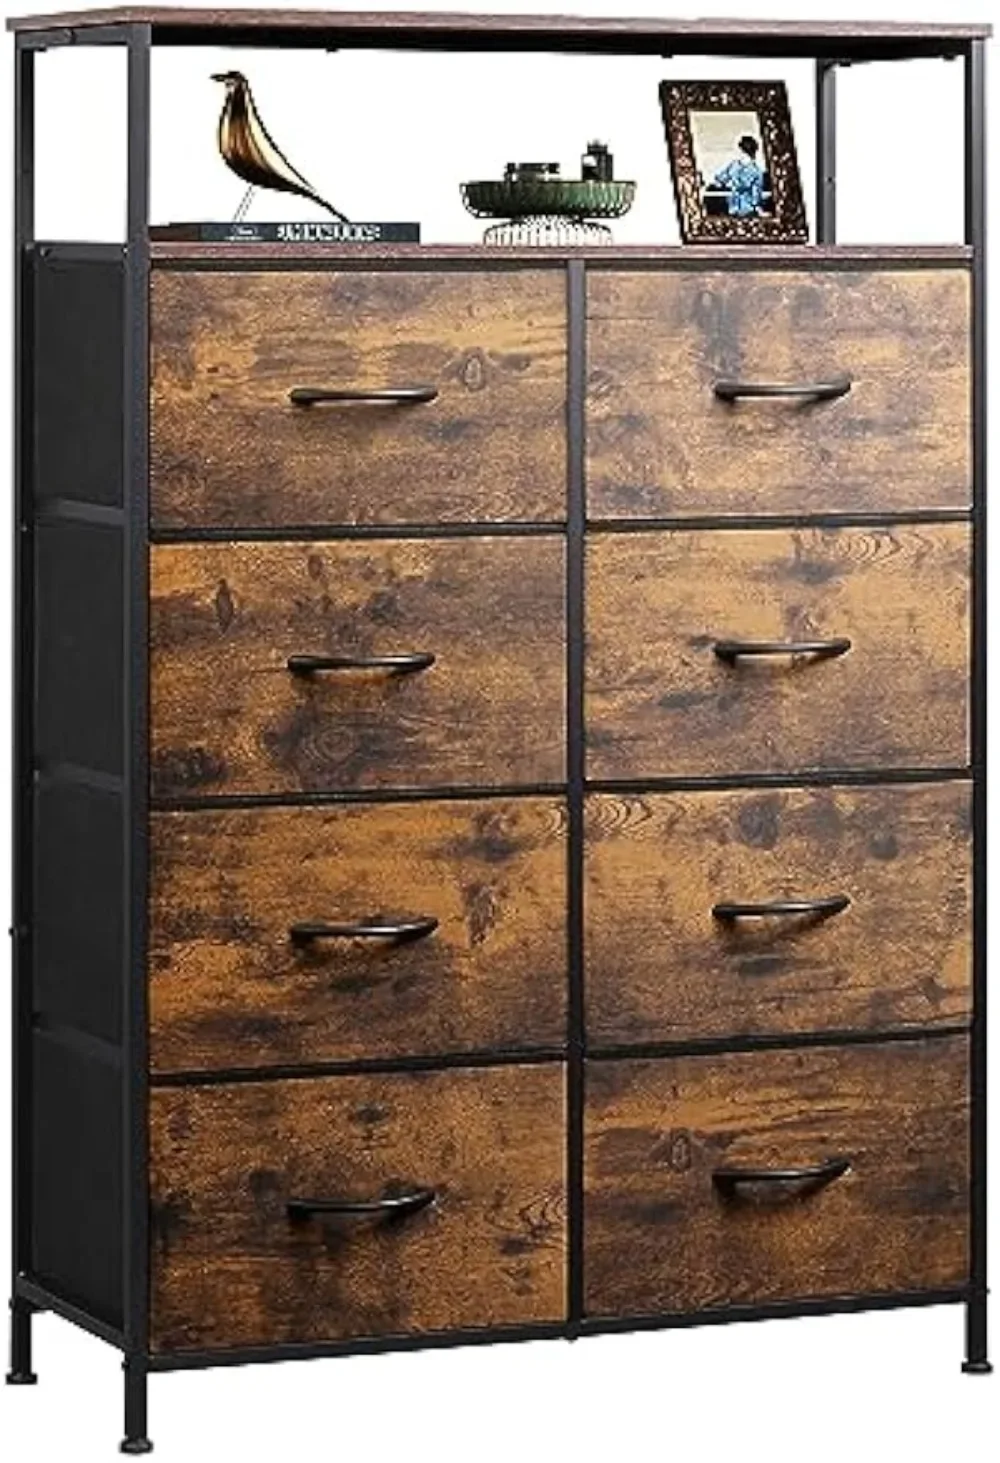 

Fabric Dresser for Bedroom, Storage Drawer Unit,Dresser with 8 Deep Drawers for Office, College Dorm, Rustic Brown Wood